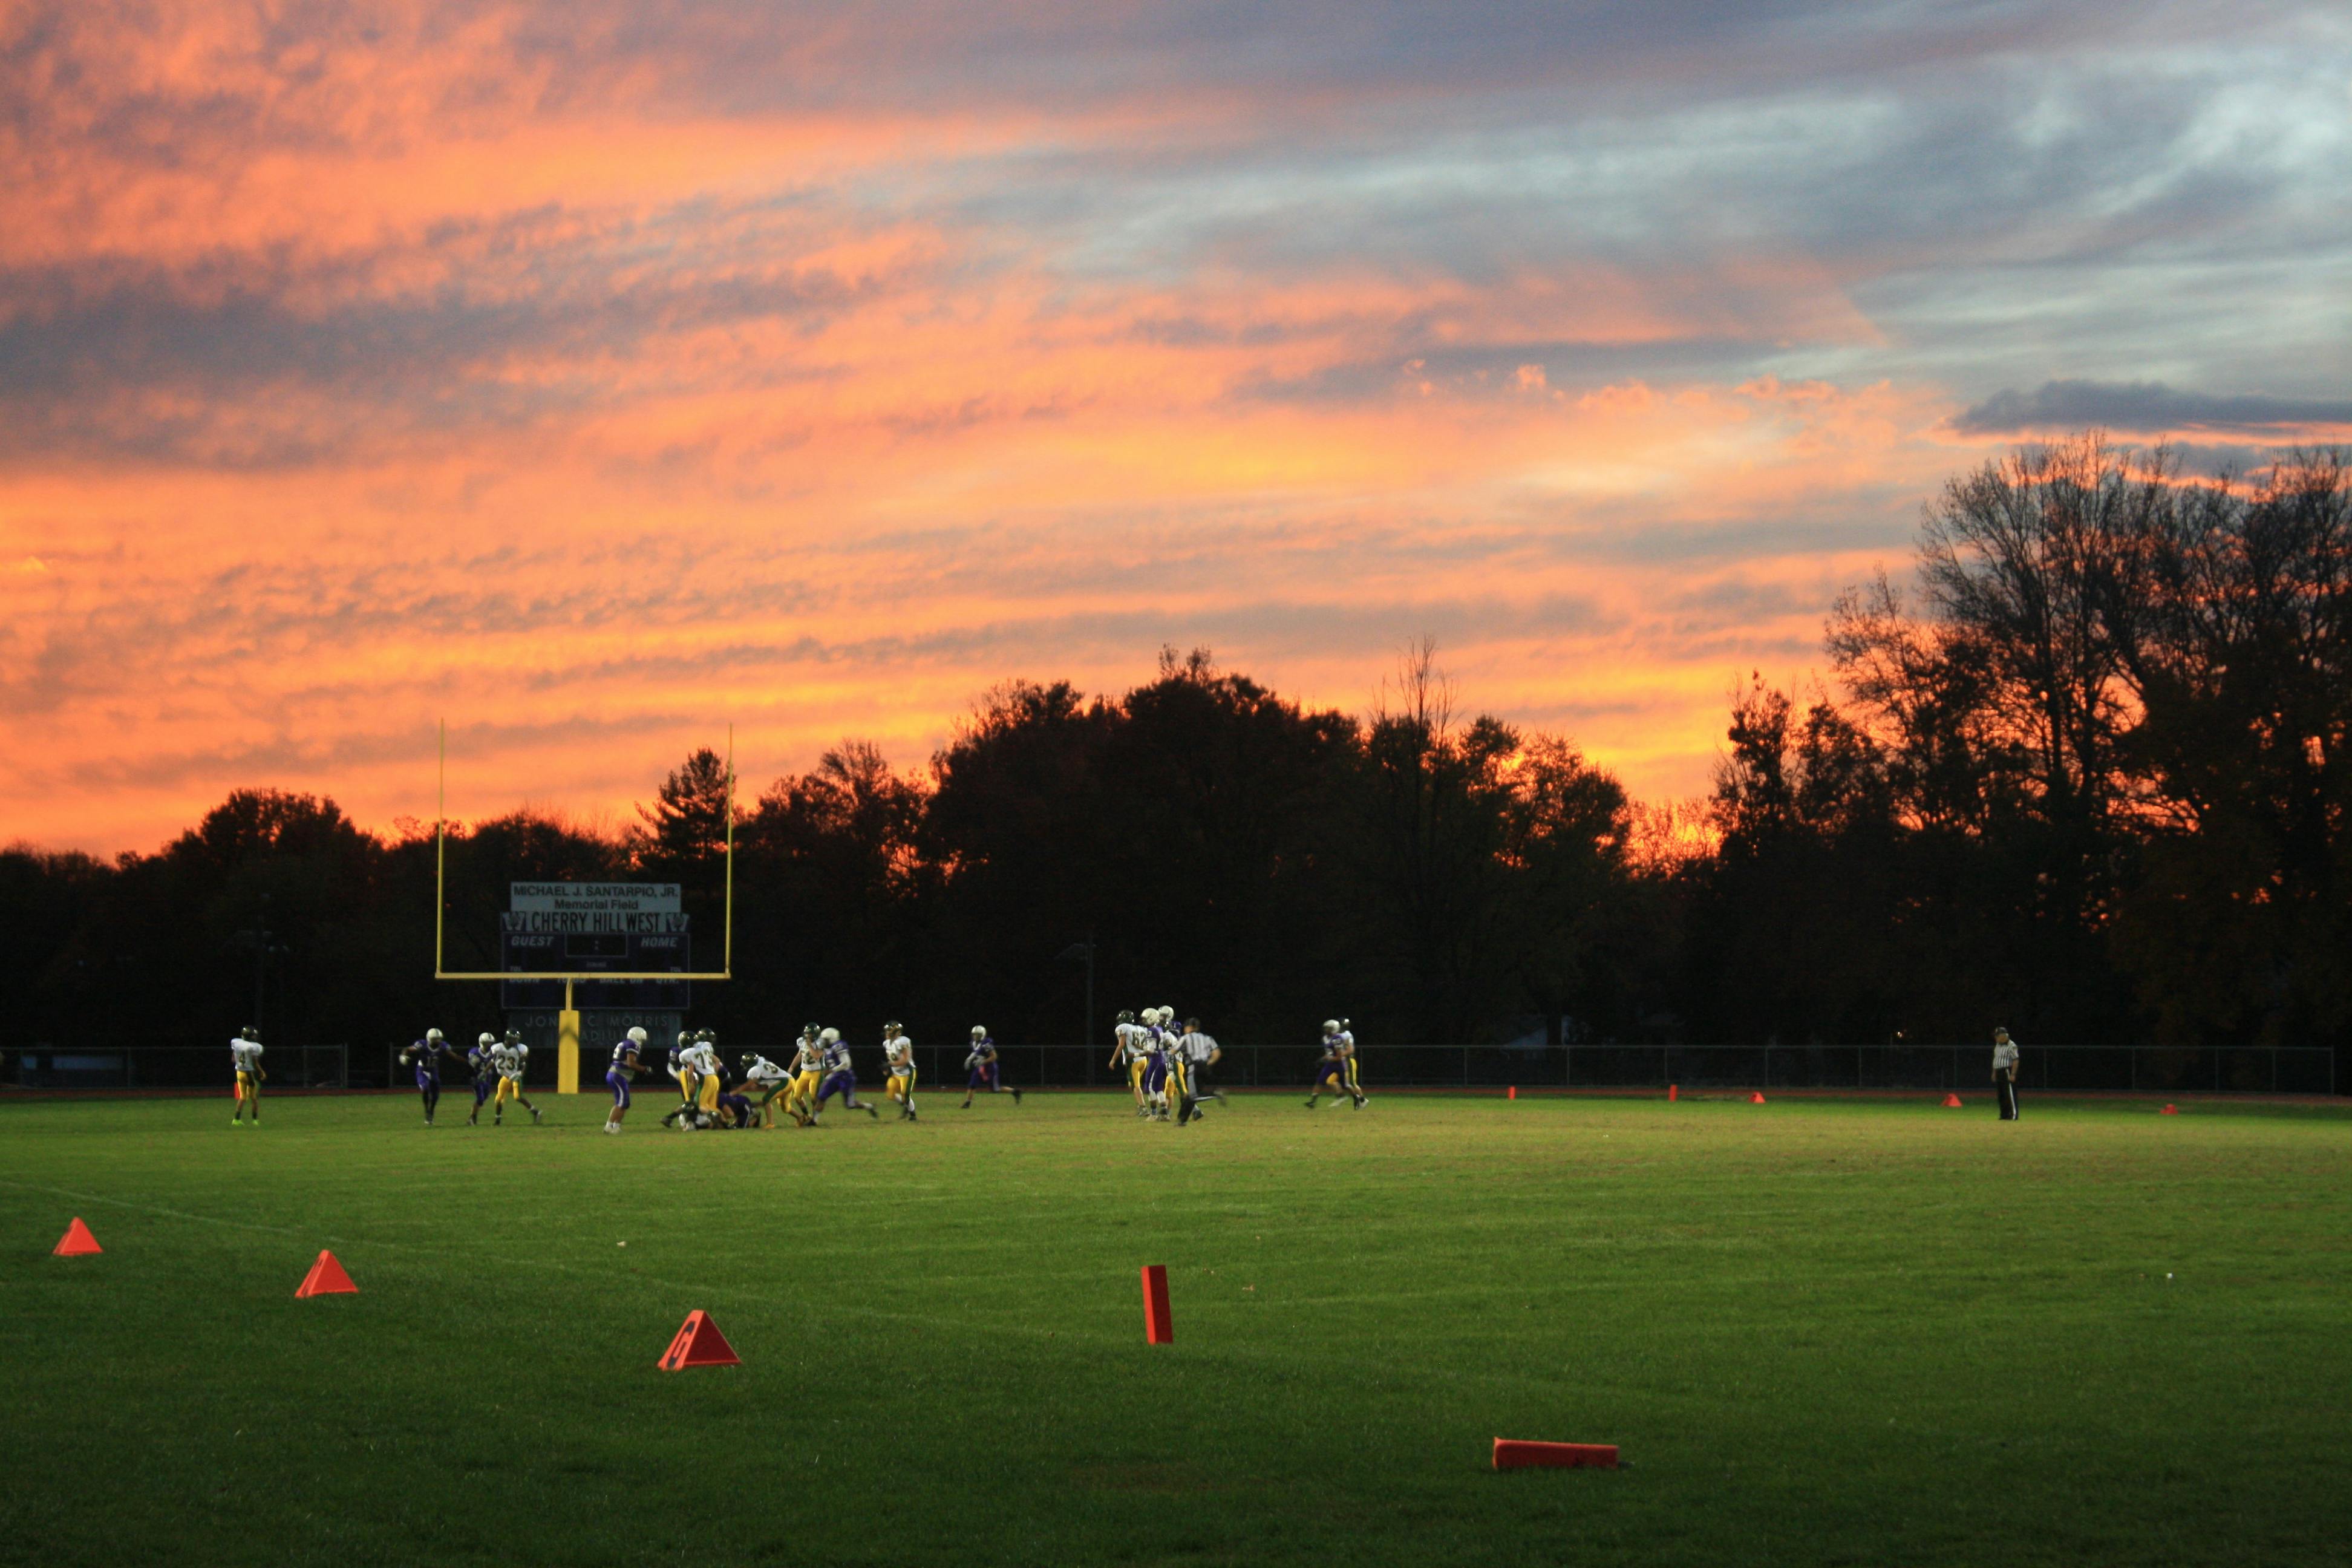 a football field with a team playing with a beautiful orange sunset